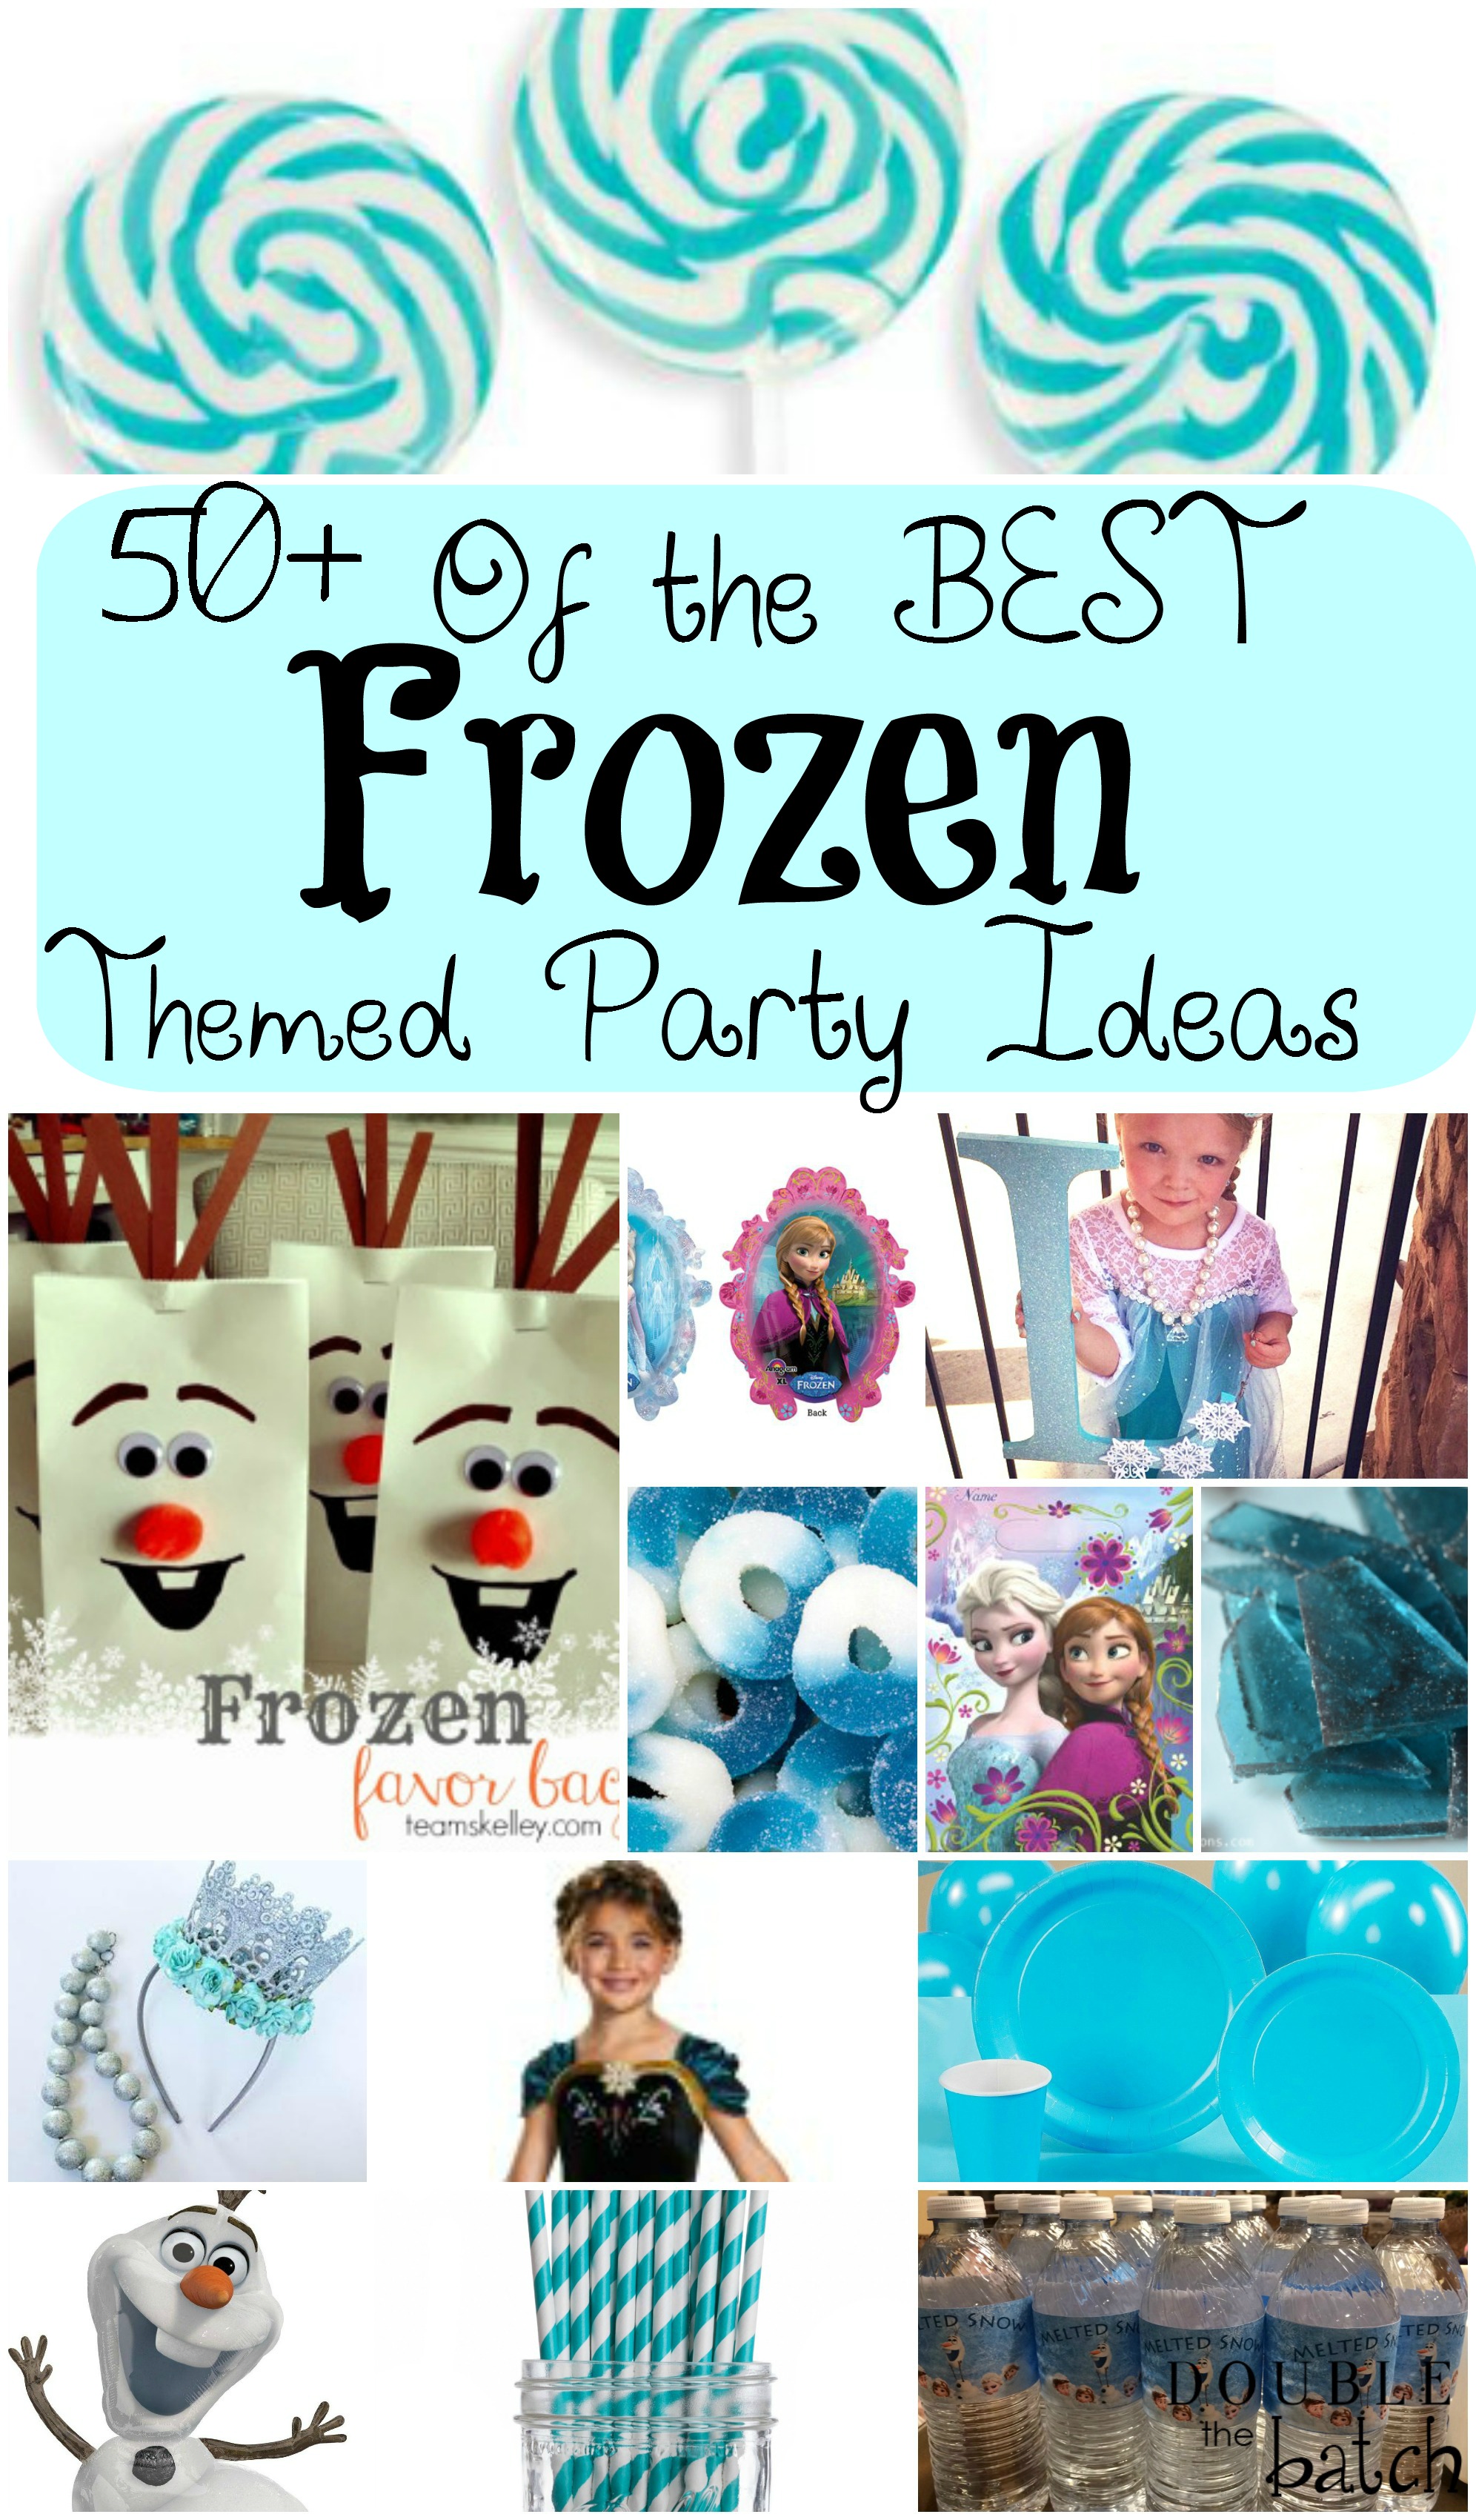 50 + of the BEST Frozen Themed Party Ideas